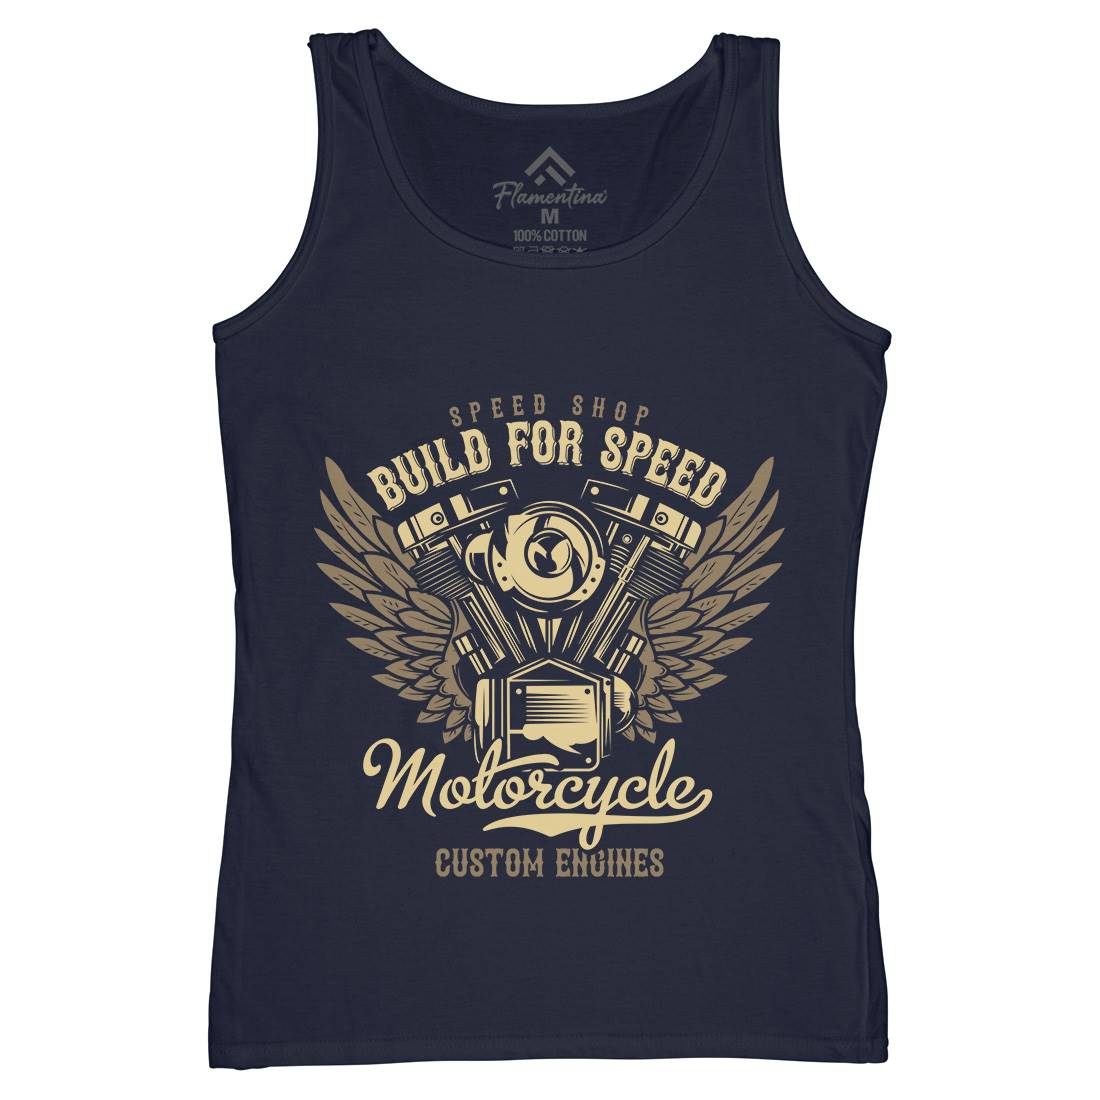 Build For Speed Womens Organic Tank Top Vest Motorcycles B842